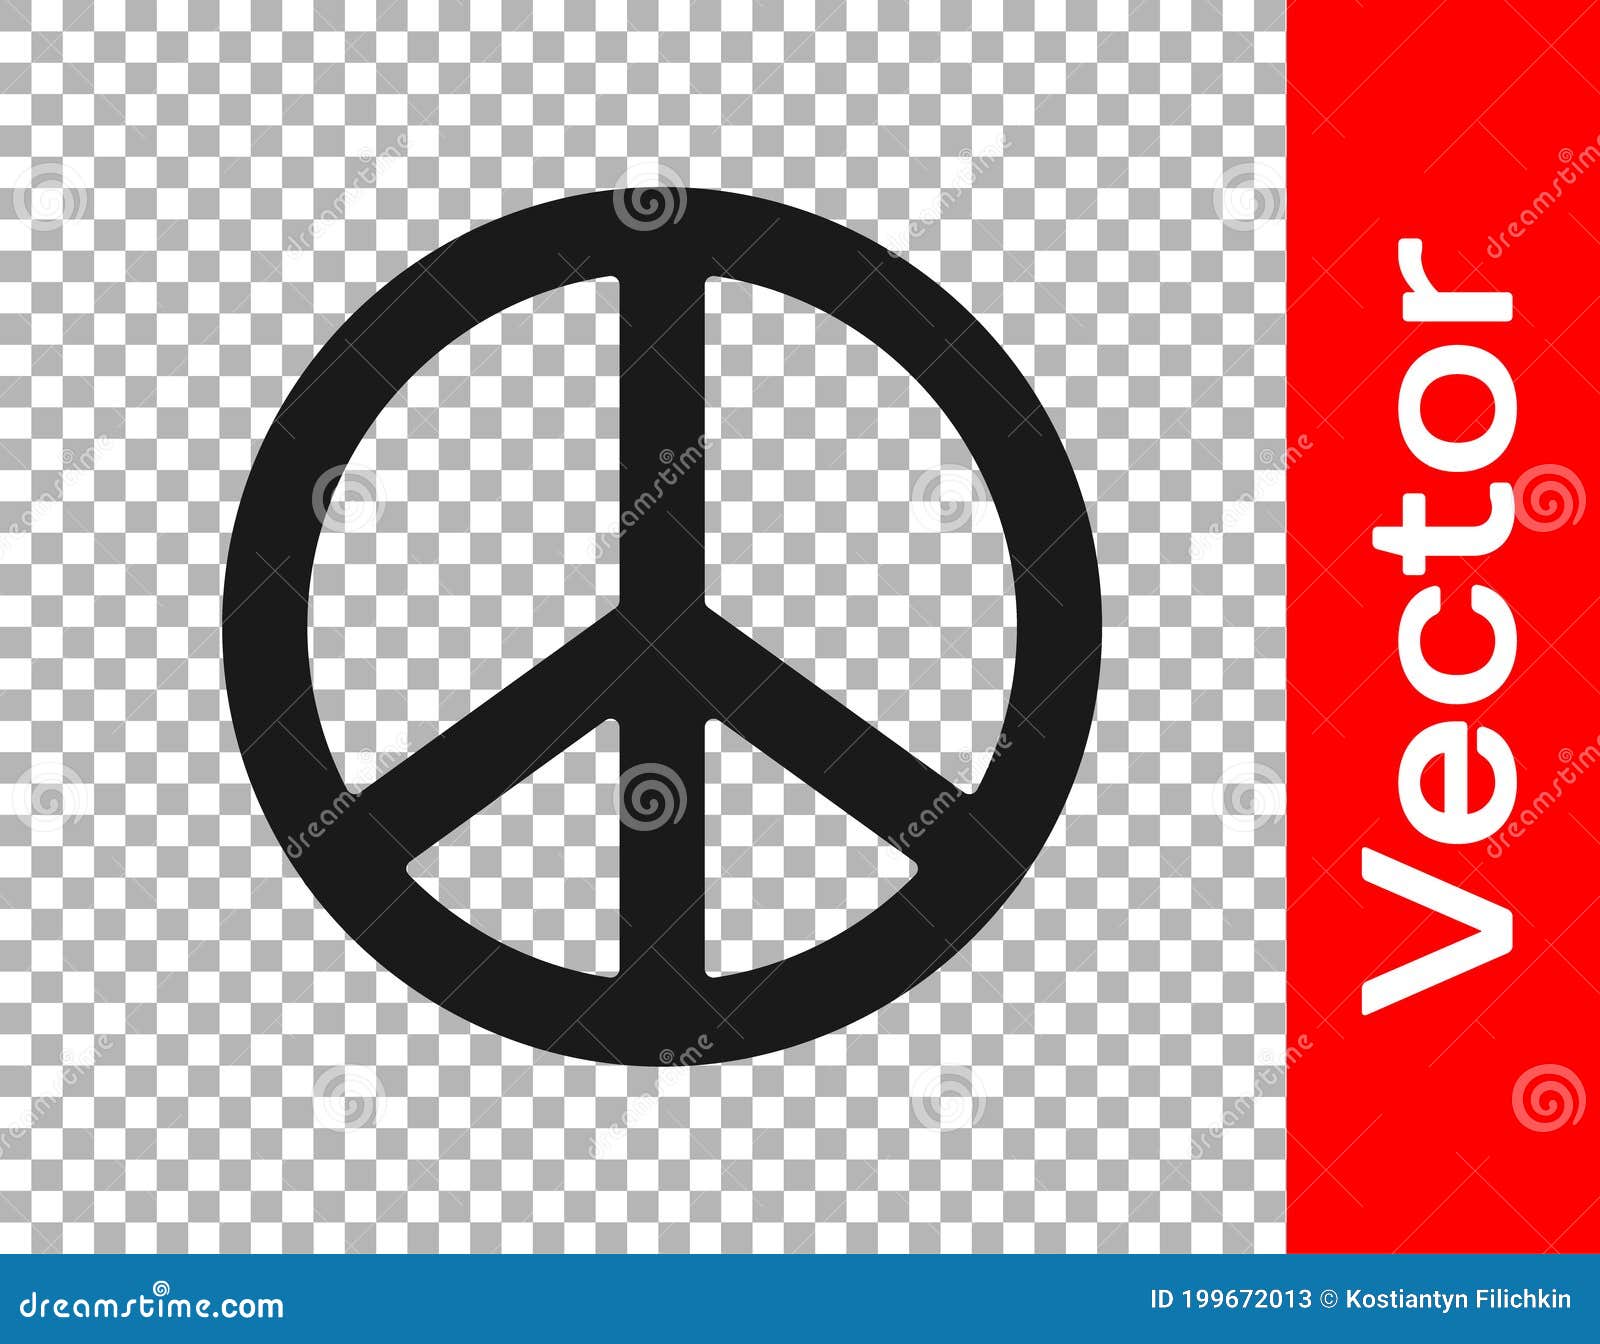 Black Peace Icon Isolated on Transparent Background. Hippie Symbol of Peace  Stock Vector - Illustration of design, background: 199672013